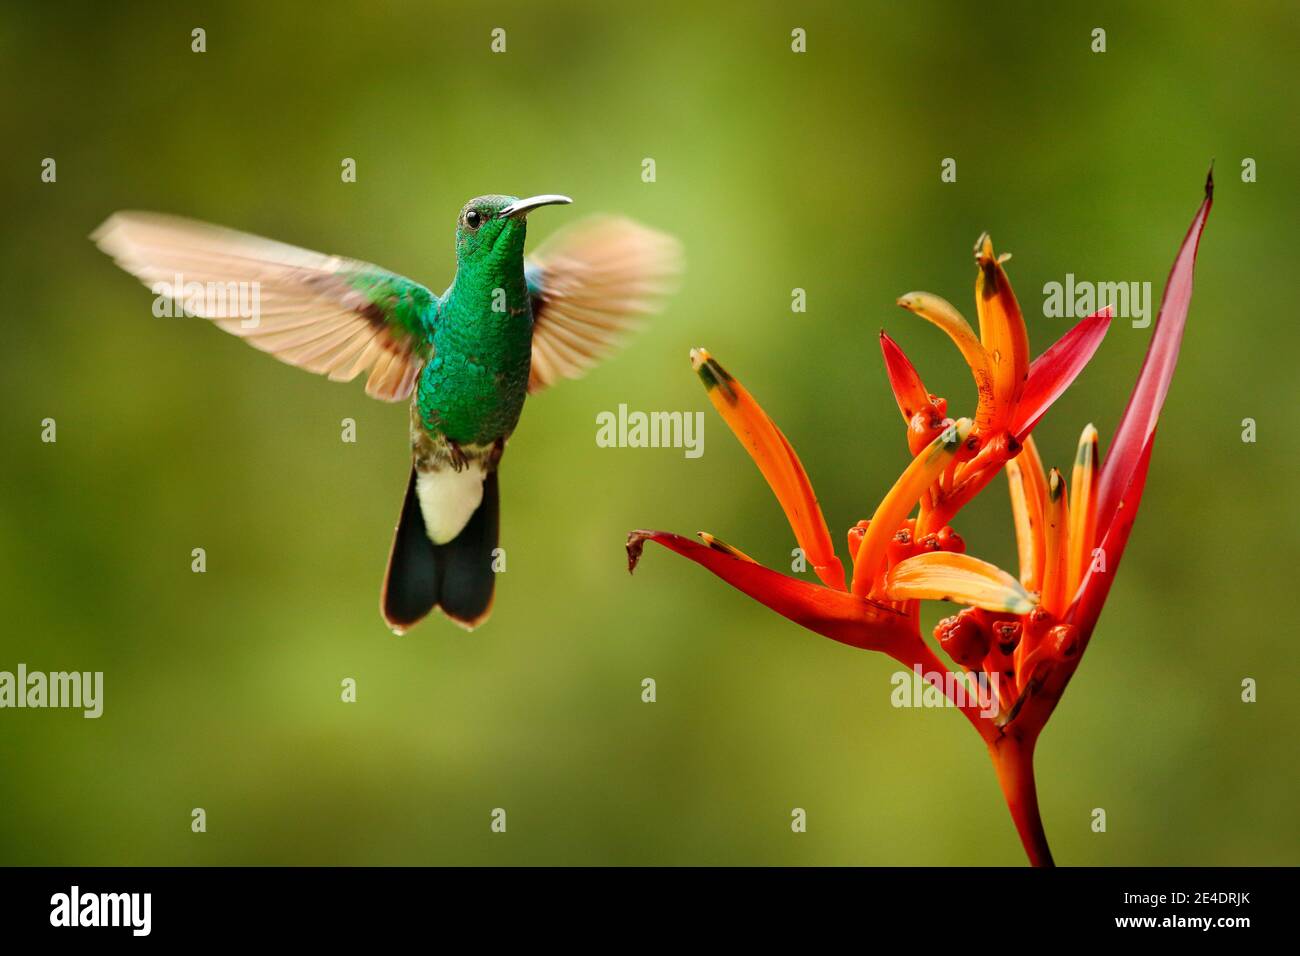 White-vented plumeleteer, Chalybura buffonii, green hummingbird from Colombia, green bird flying next to beautiful red flower, action feeding scene in Stock Photo